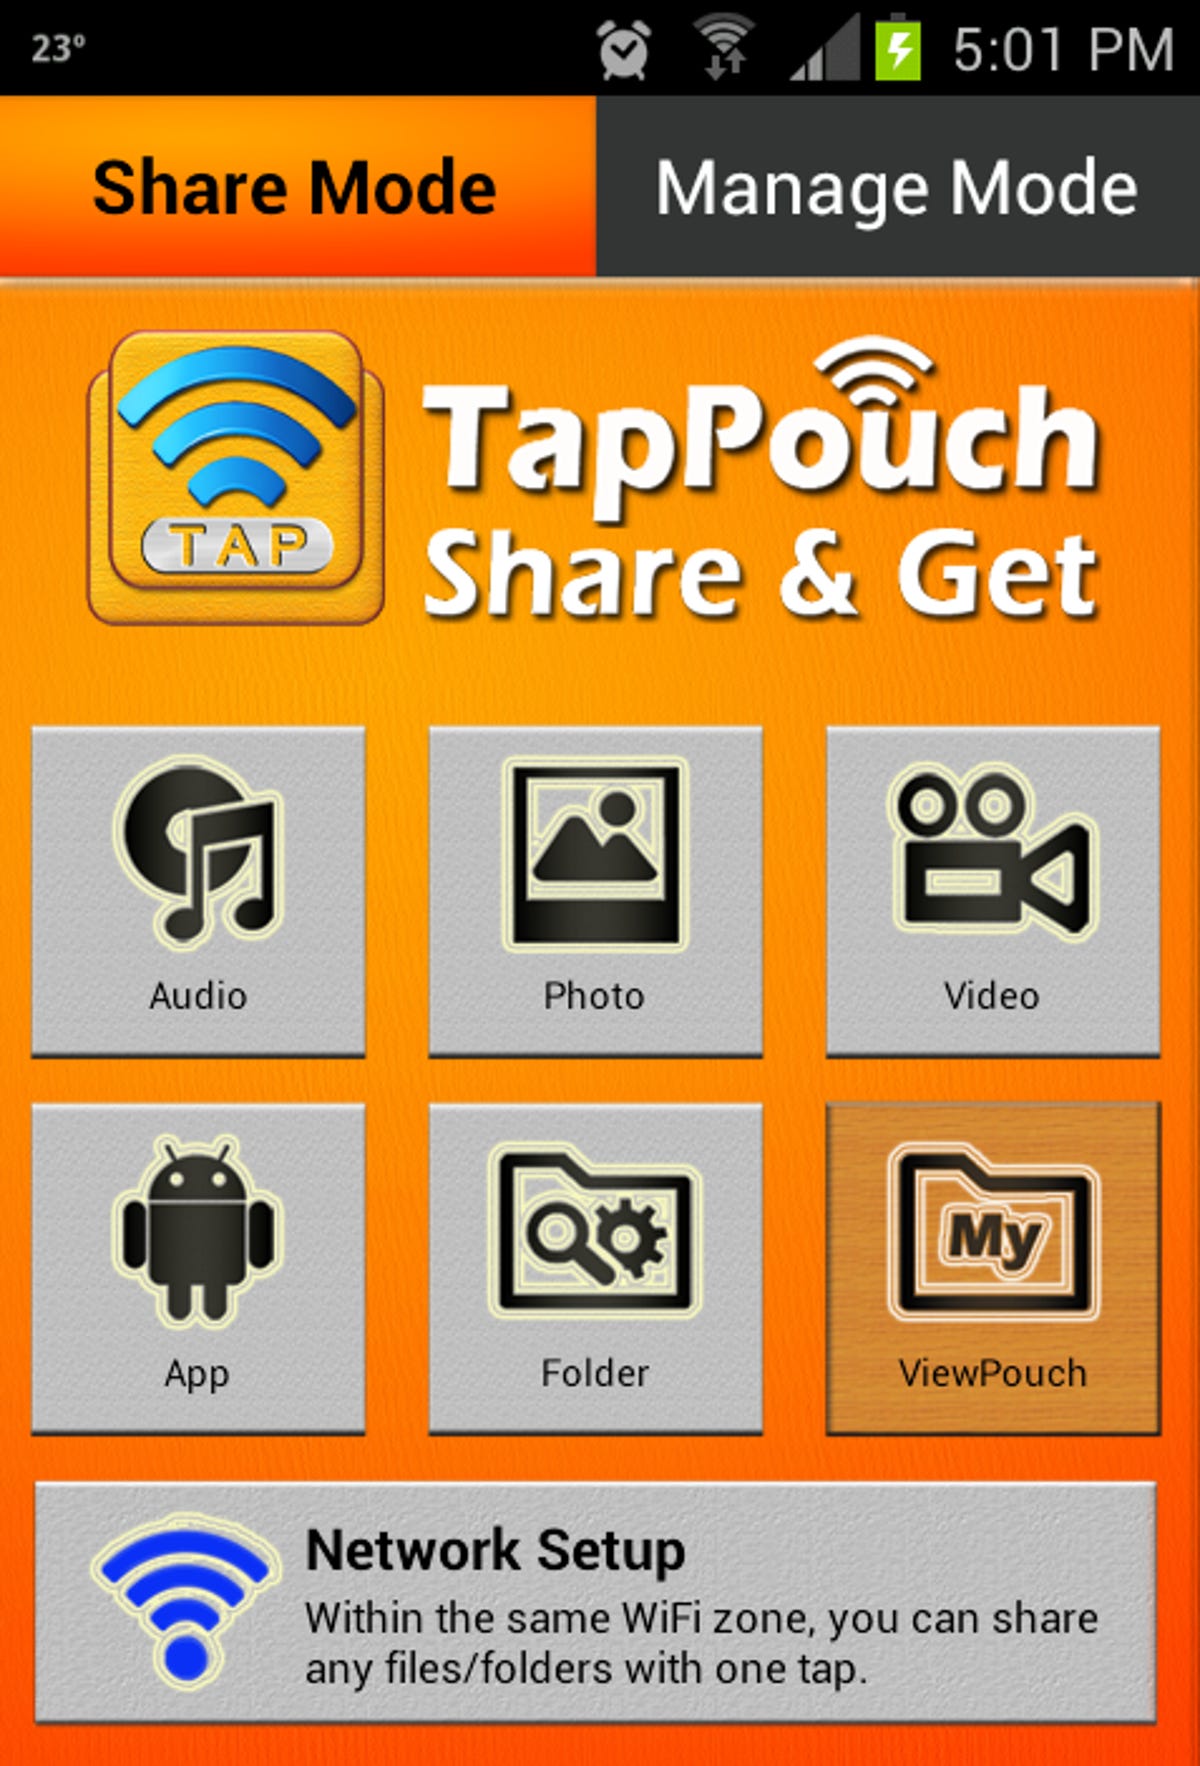 Step 3: Select file type to share with TapPouch.